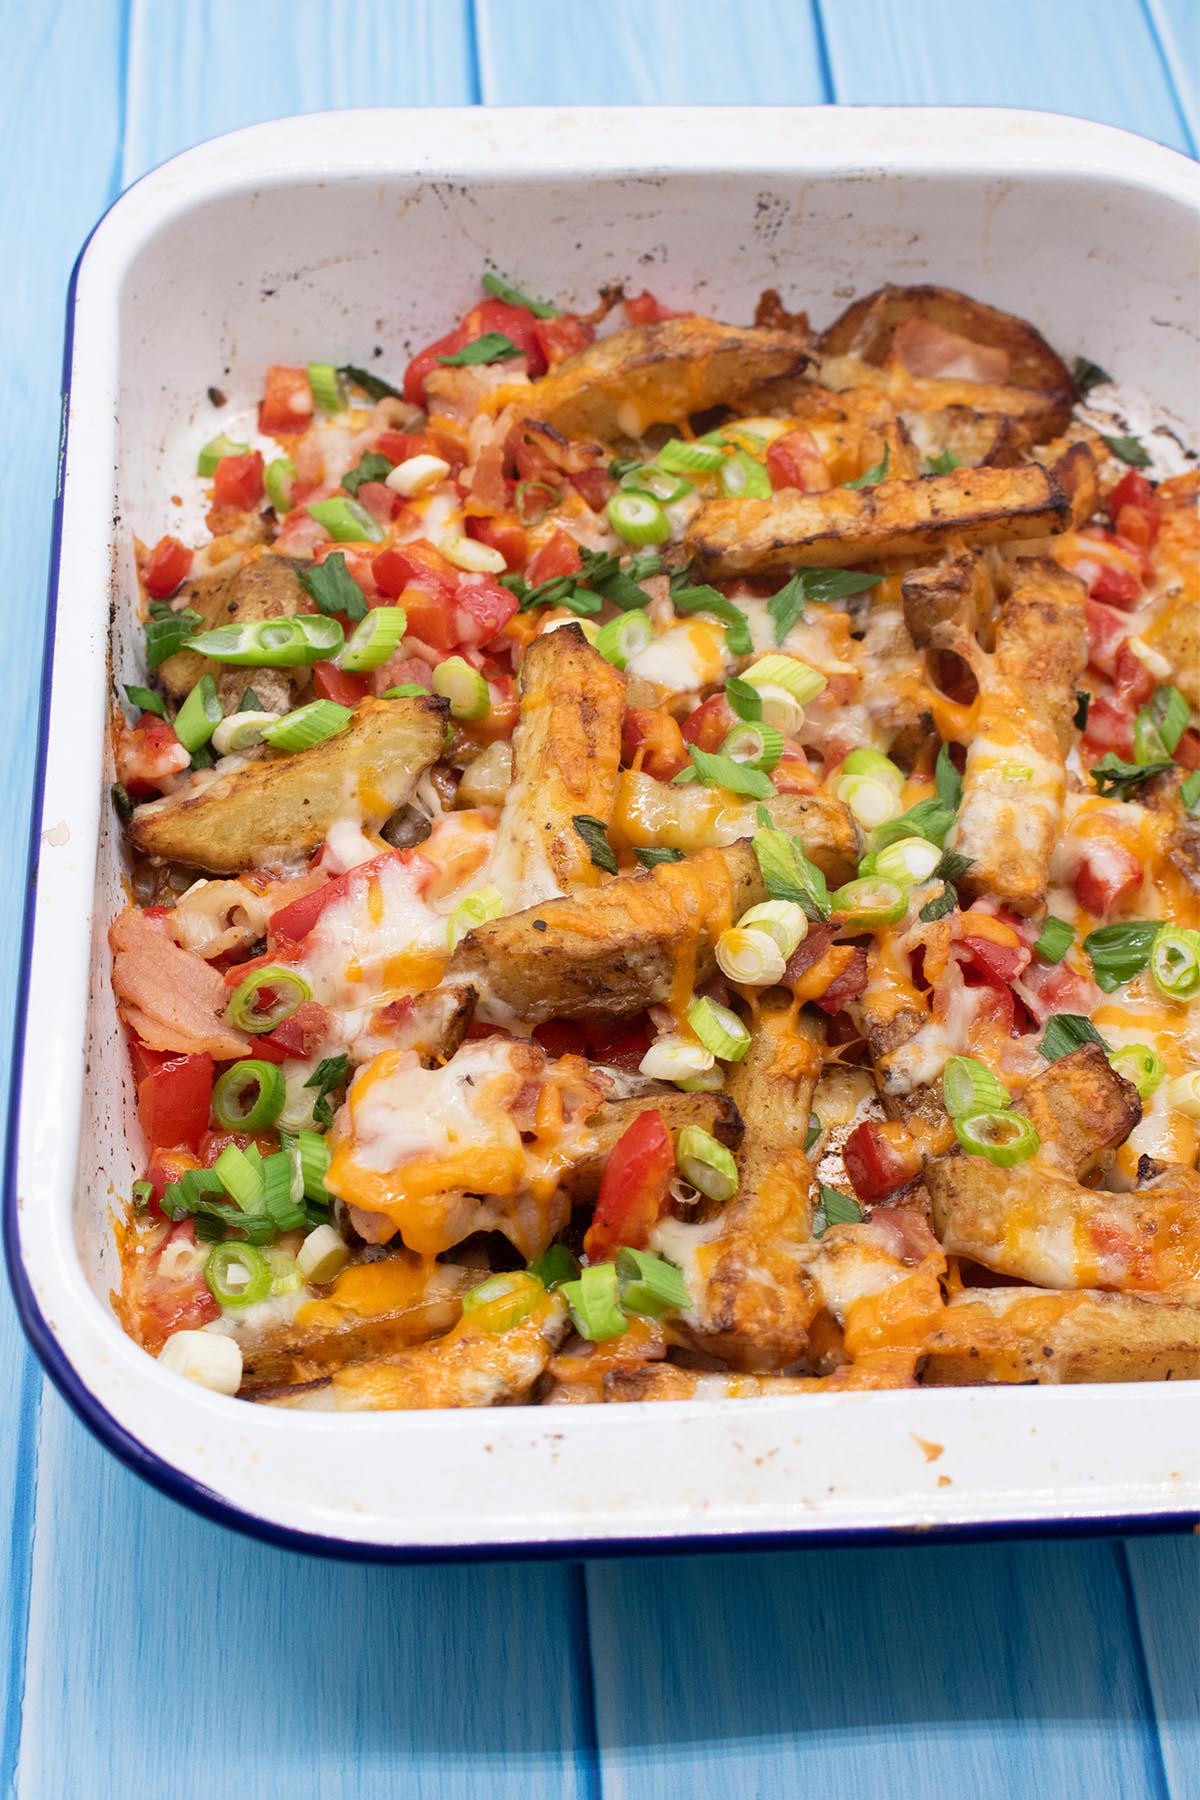 Dirty fries covered in cheese, spring onions, bacon and pepper in a rectangle oven tray